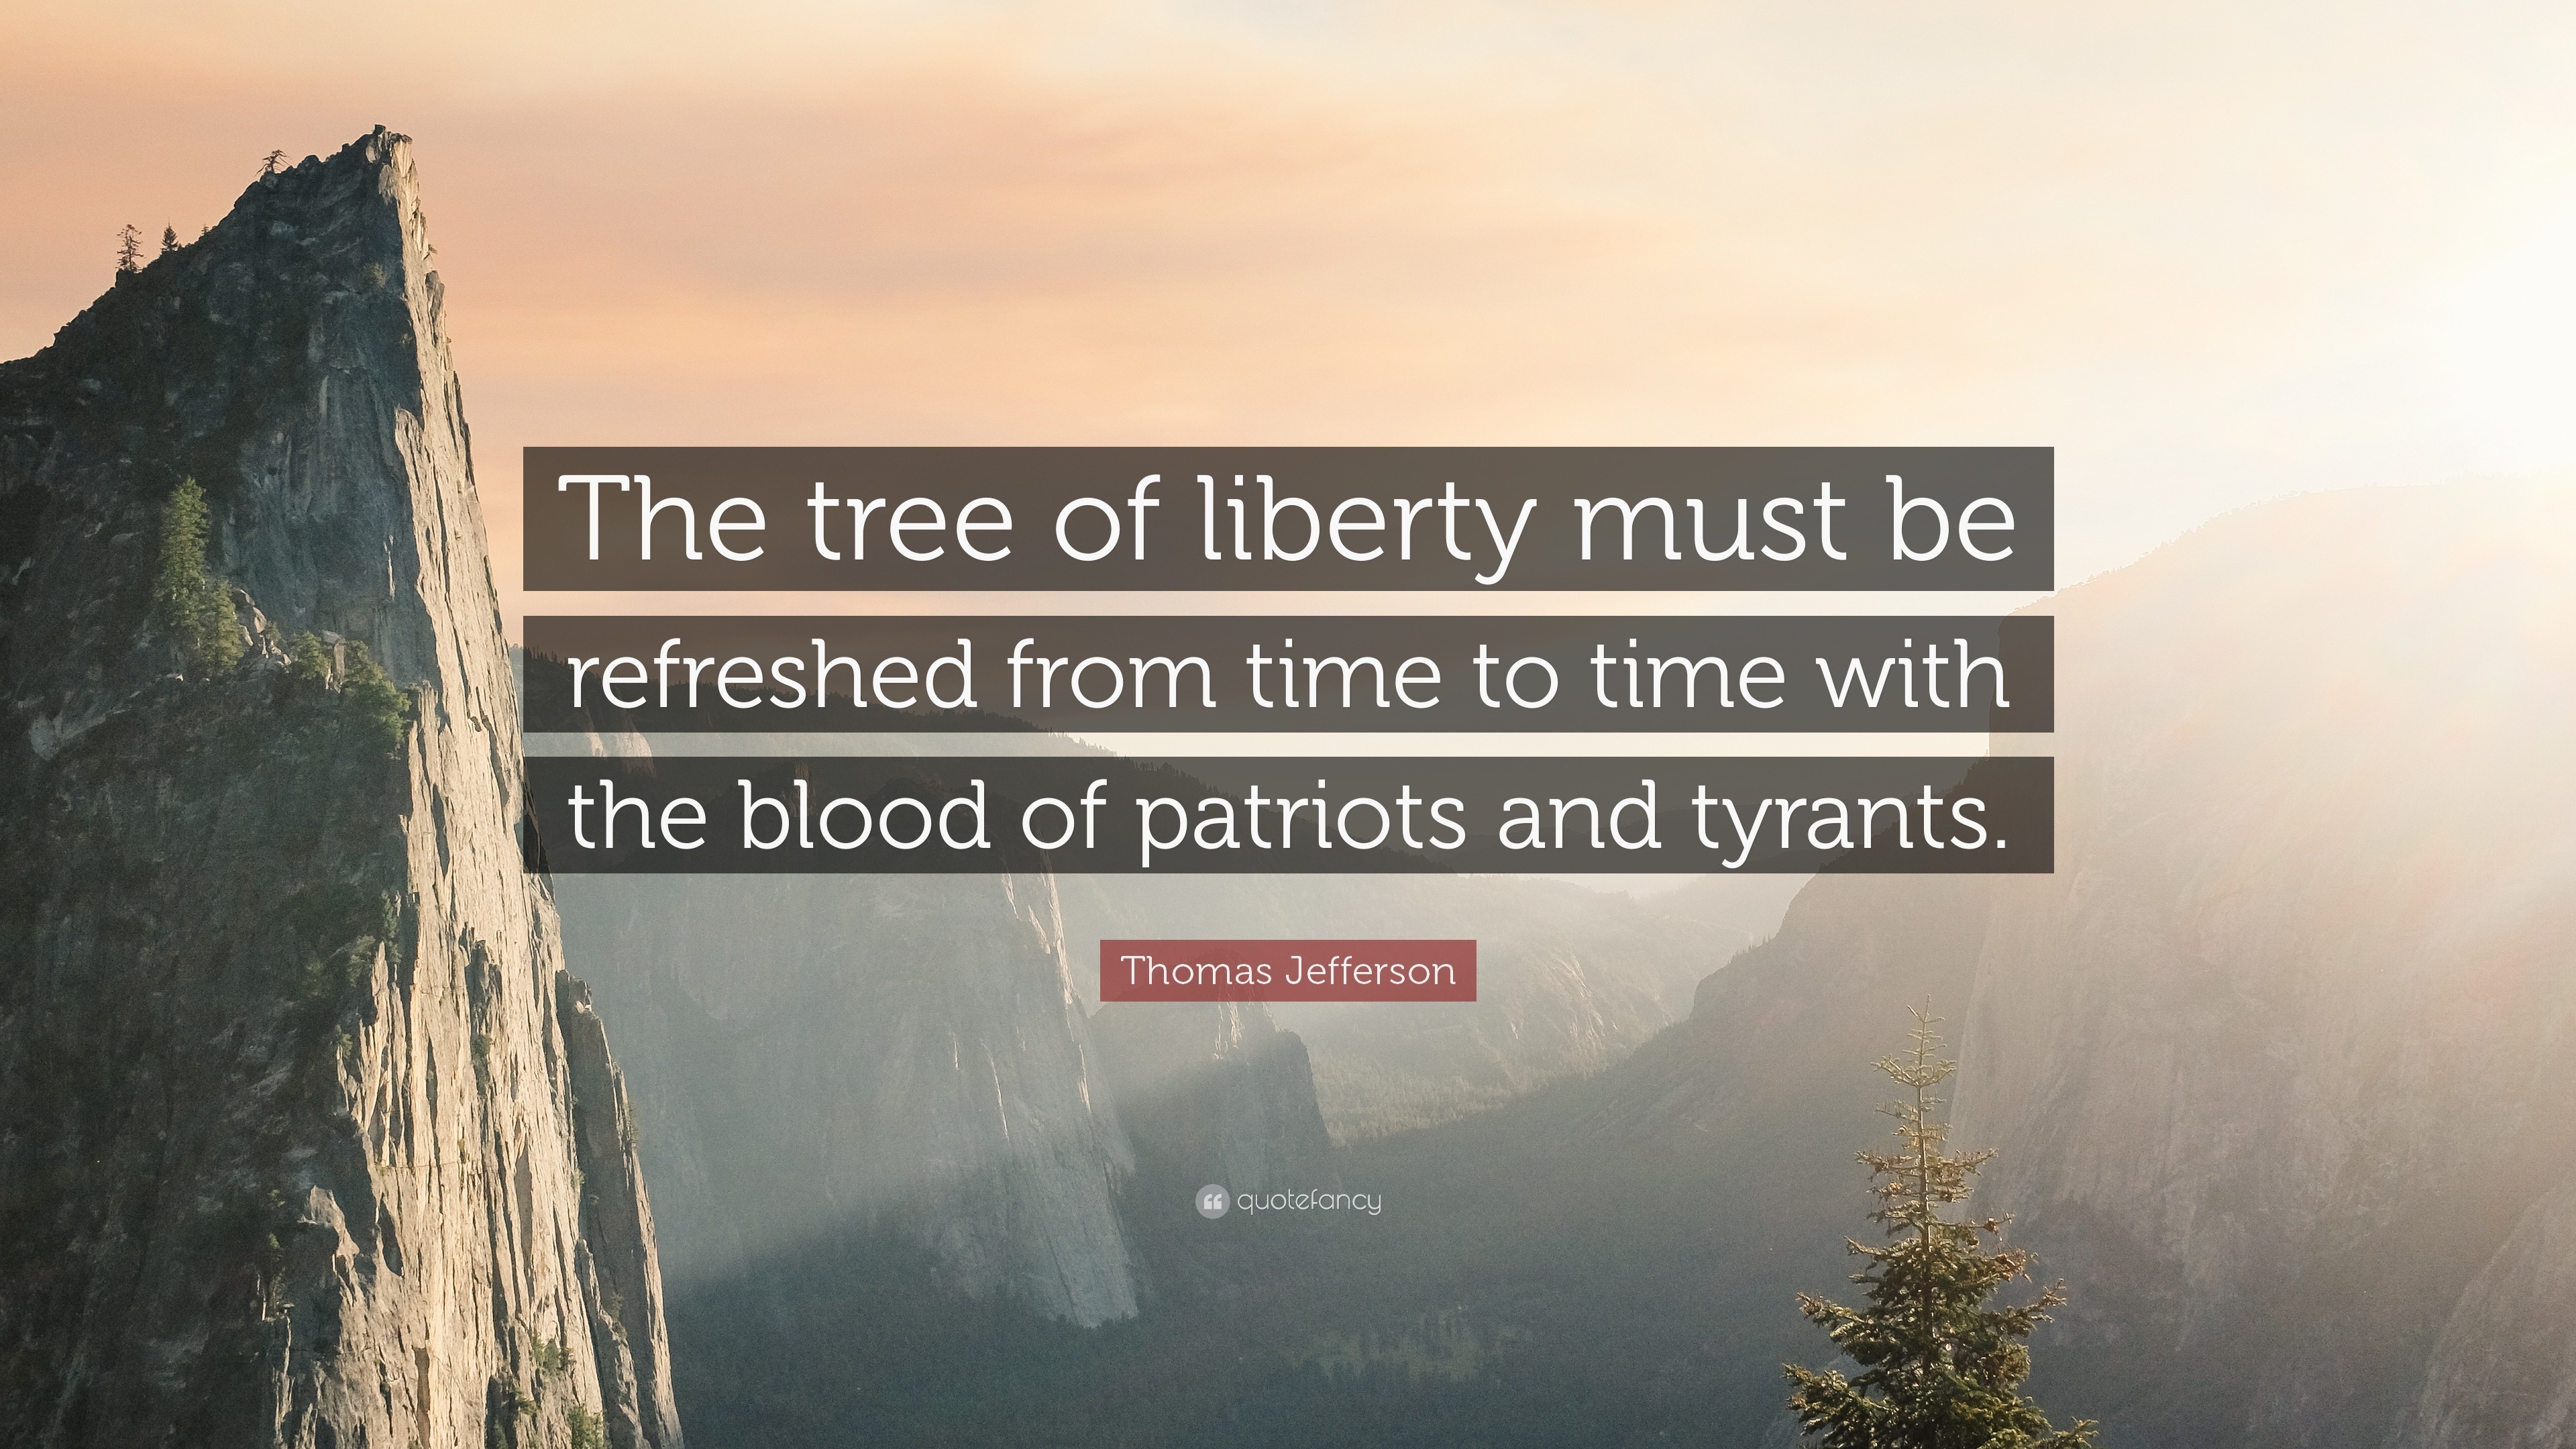 Thomas Jefferson Quote “The tree of liberty must be refreshed from